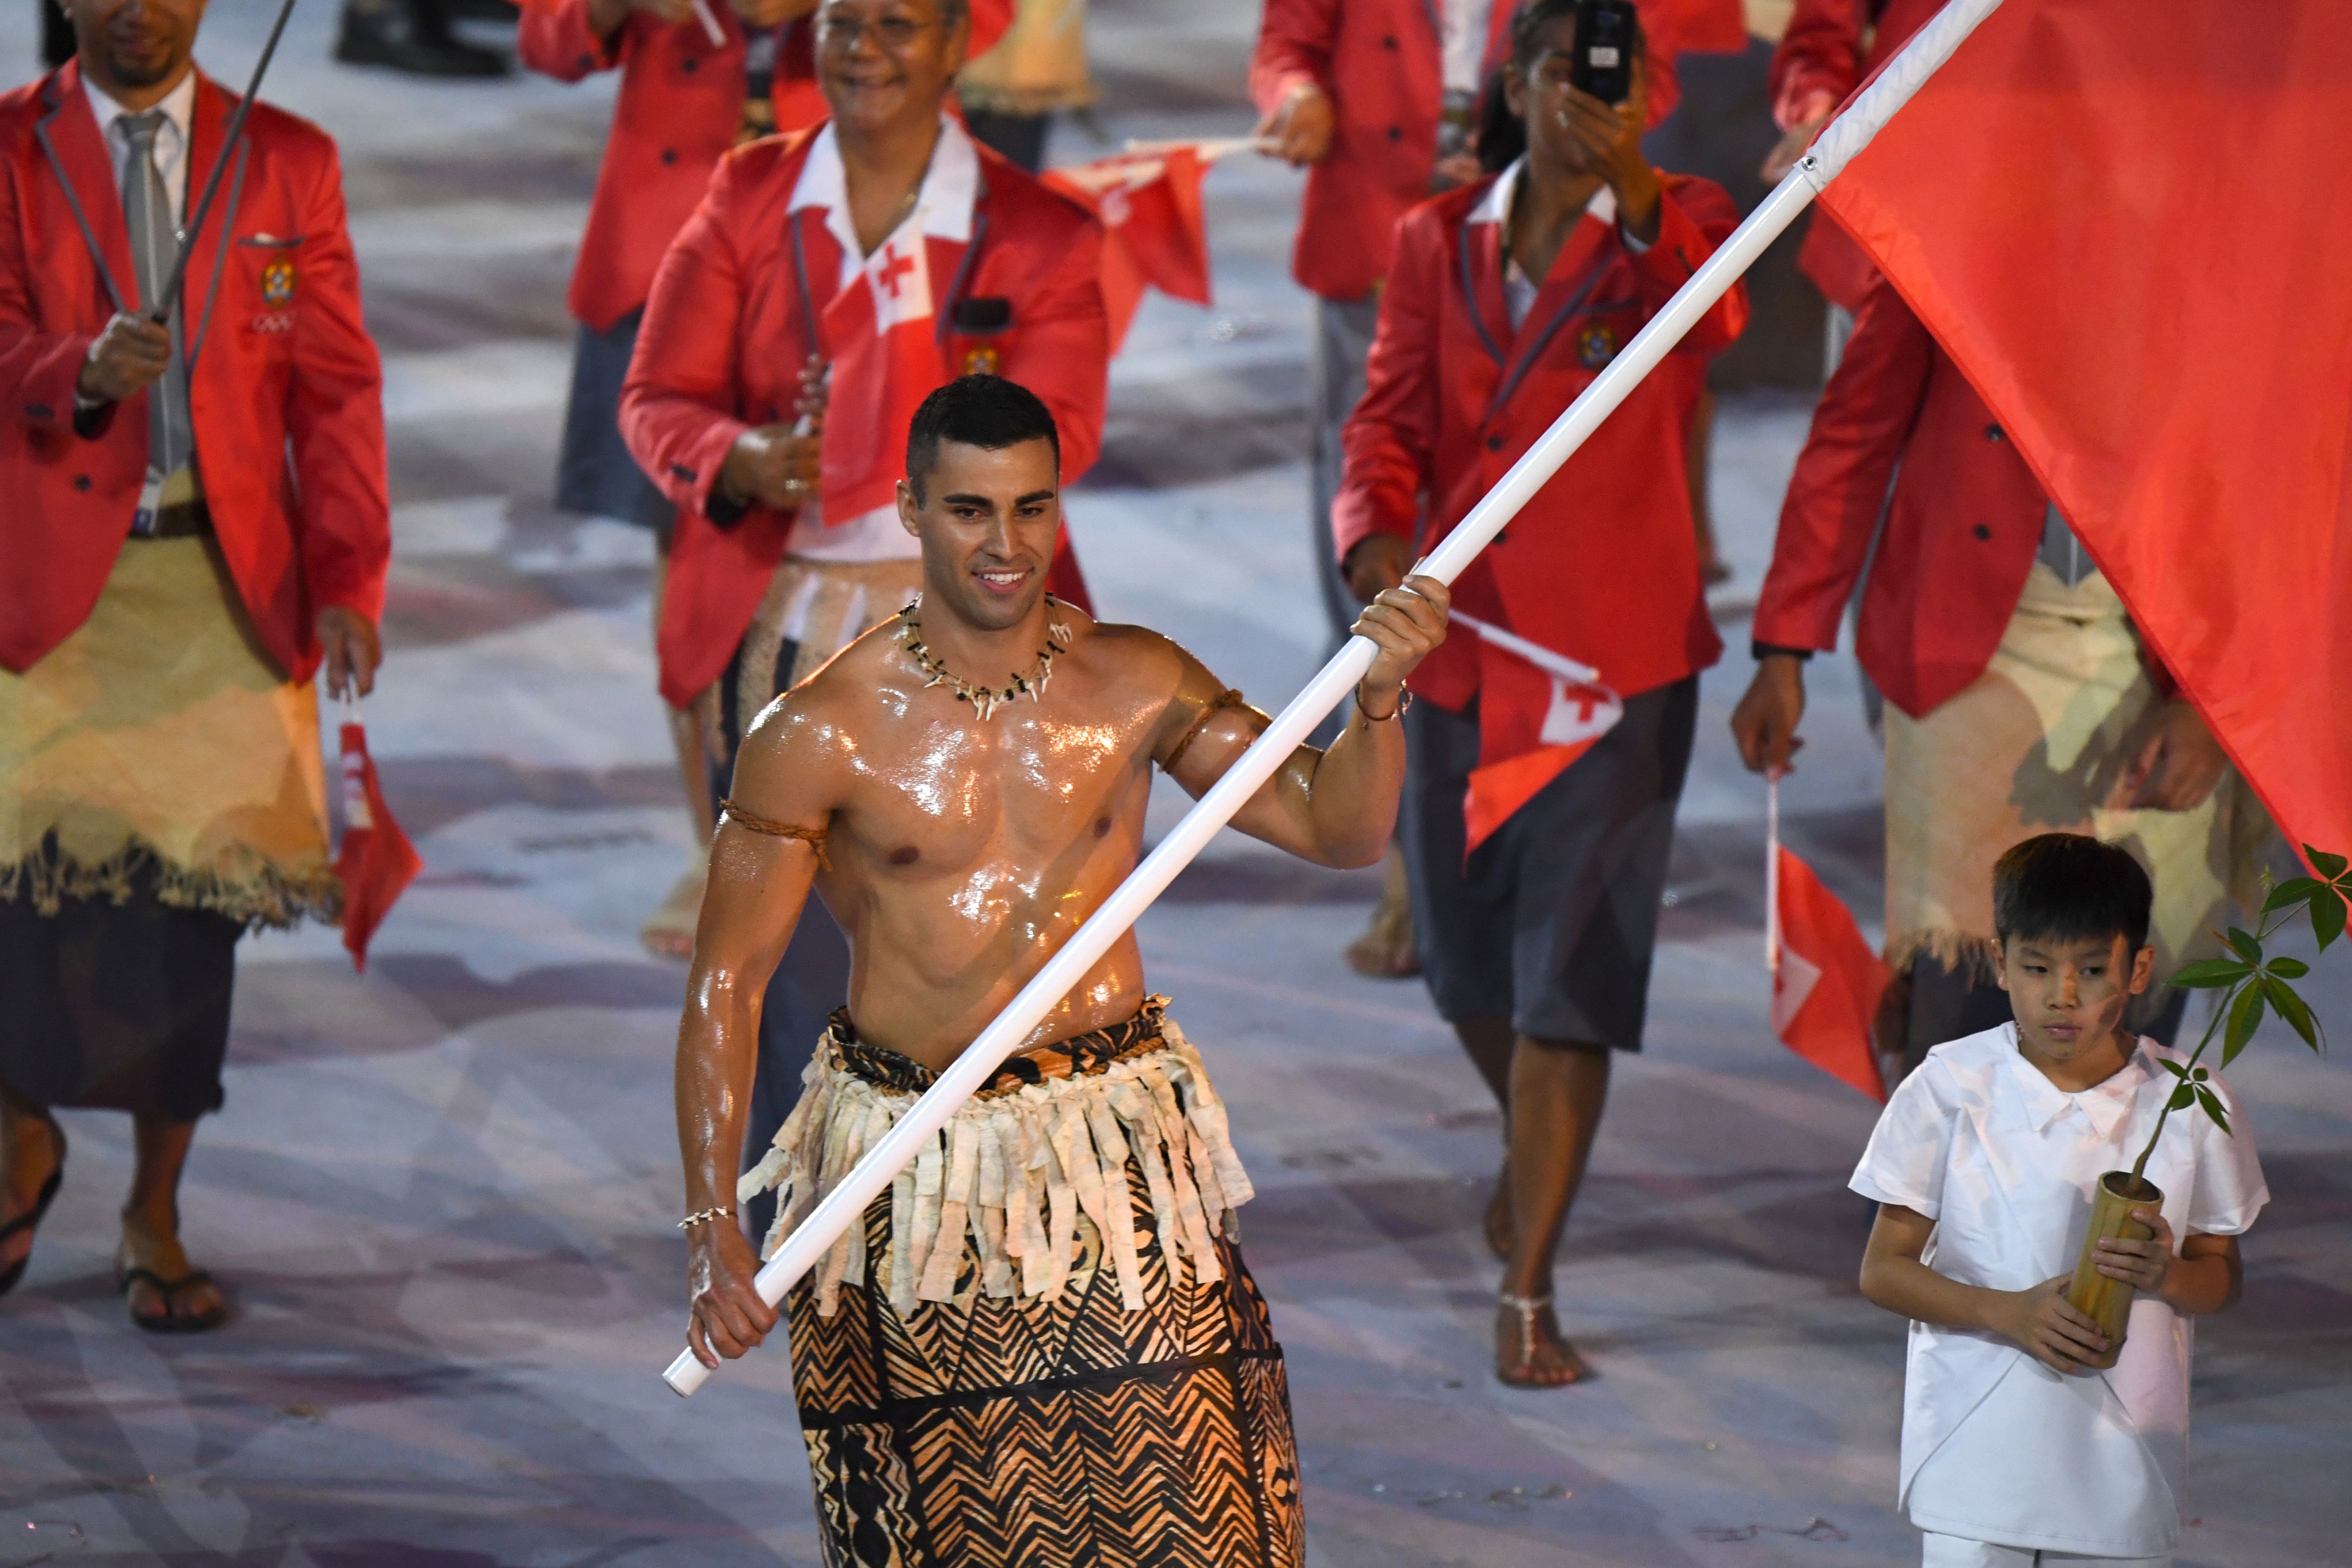 Tonga's flagbearer Pita Nikolas Taufatofua leads his delegation during the opening ceremony of the Rio 2016 Olympic Games at the Maracana stadium in Rio de Janeiro on Aug. 5, 2016. (Olivier Mornin—AFP/Getty Images)